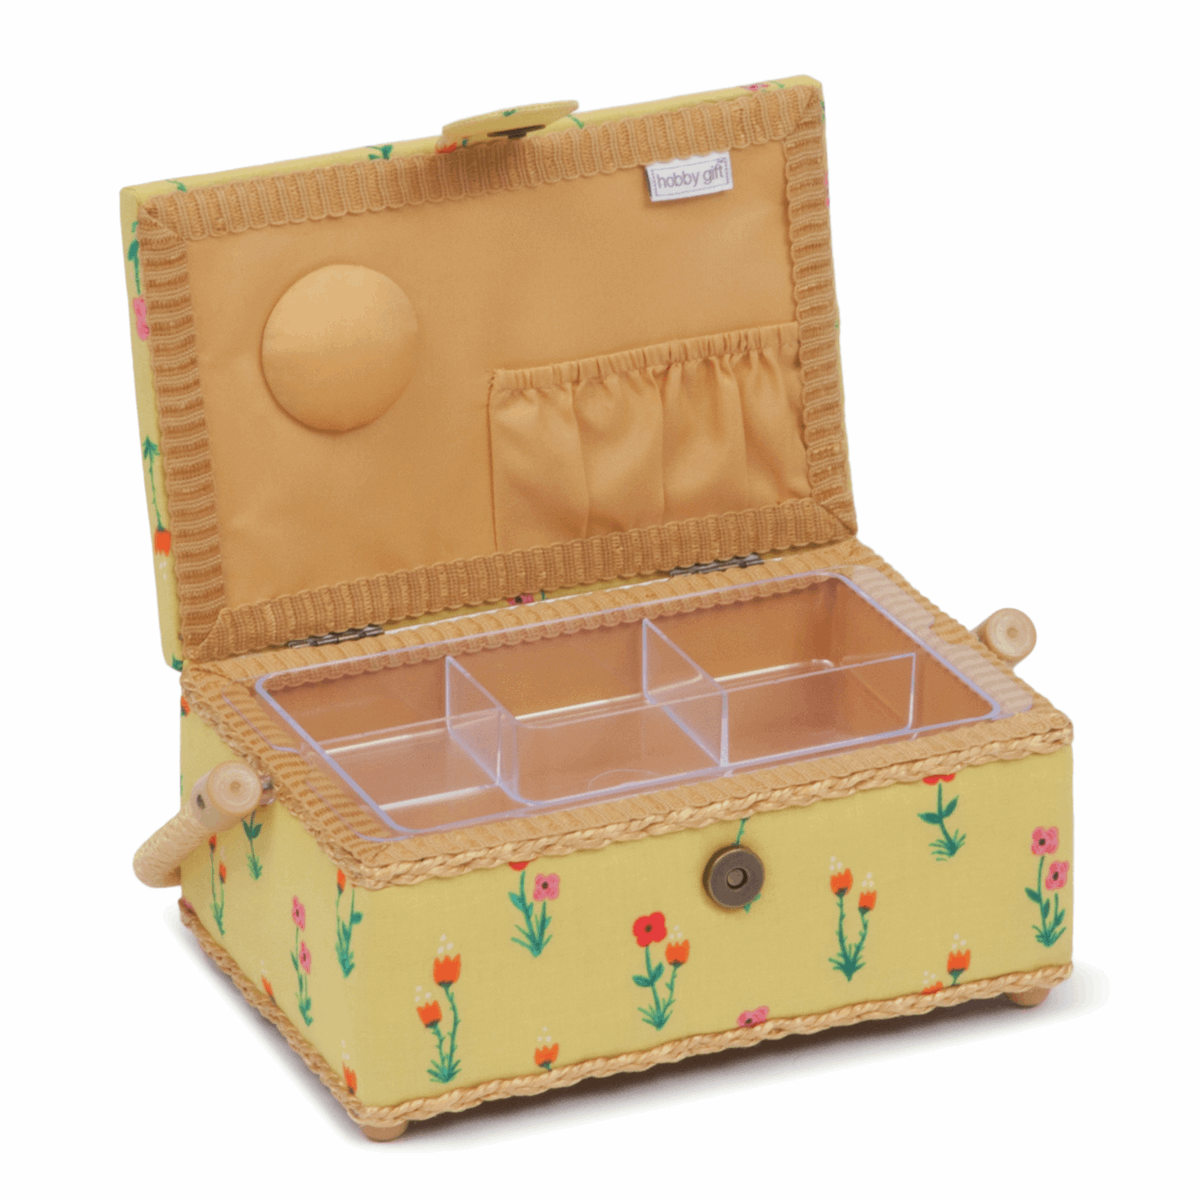 Meadow Sewing Box - Small